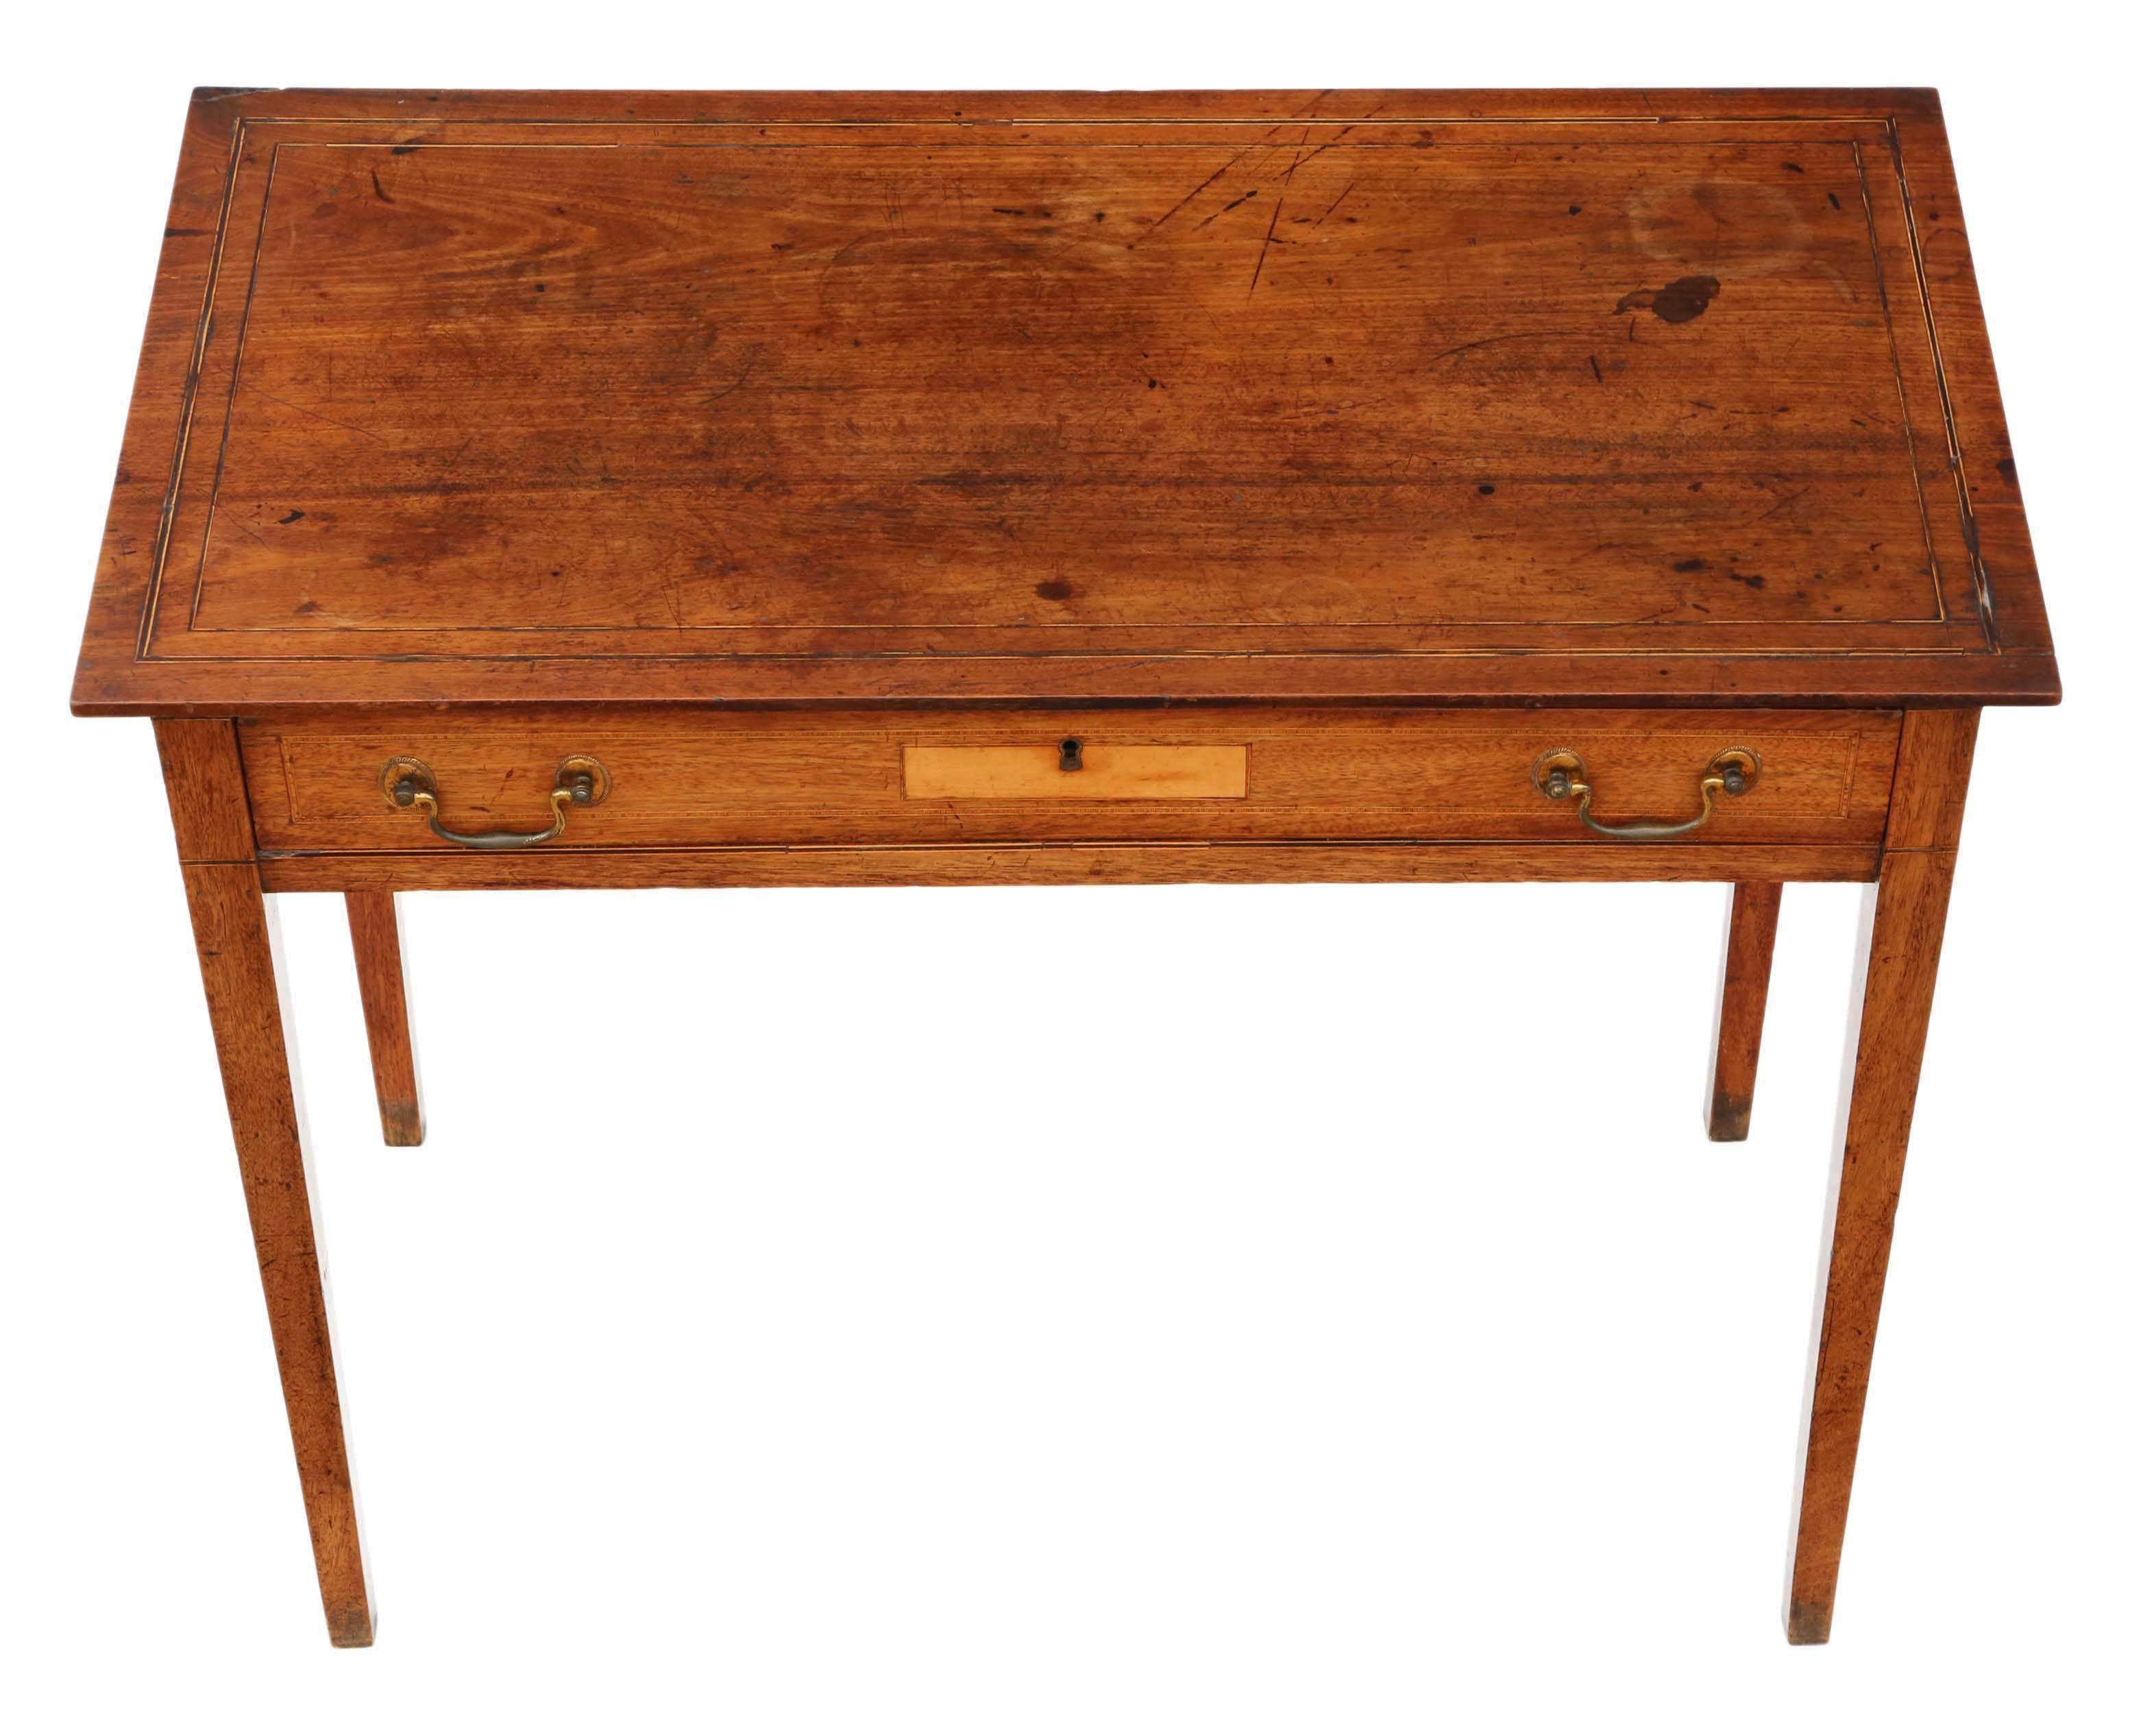 Antique quality Georgian George III circa 1810 inlaid mahogany desk or writing table. Elegant style. Original ormolu handles. A rare find.

No loose joints. Full of age, character and charm. The oak lined drawer slides freely.

Would look great